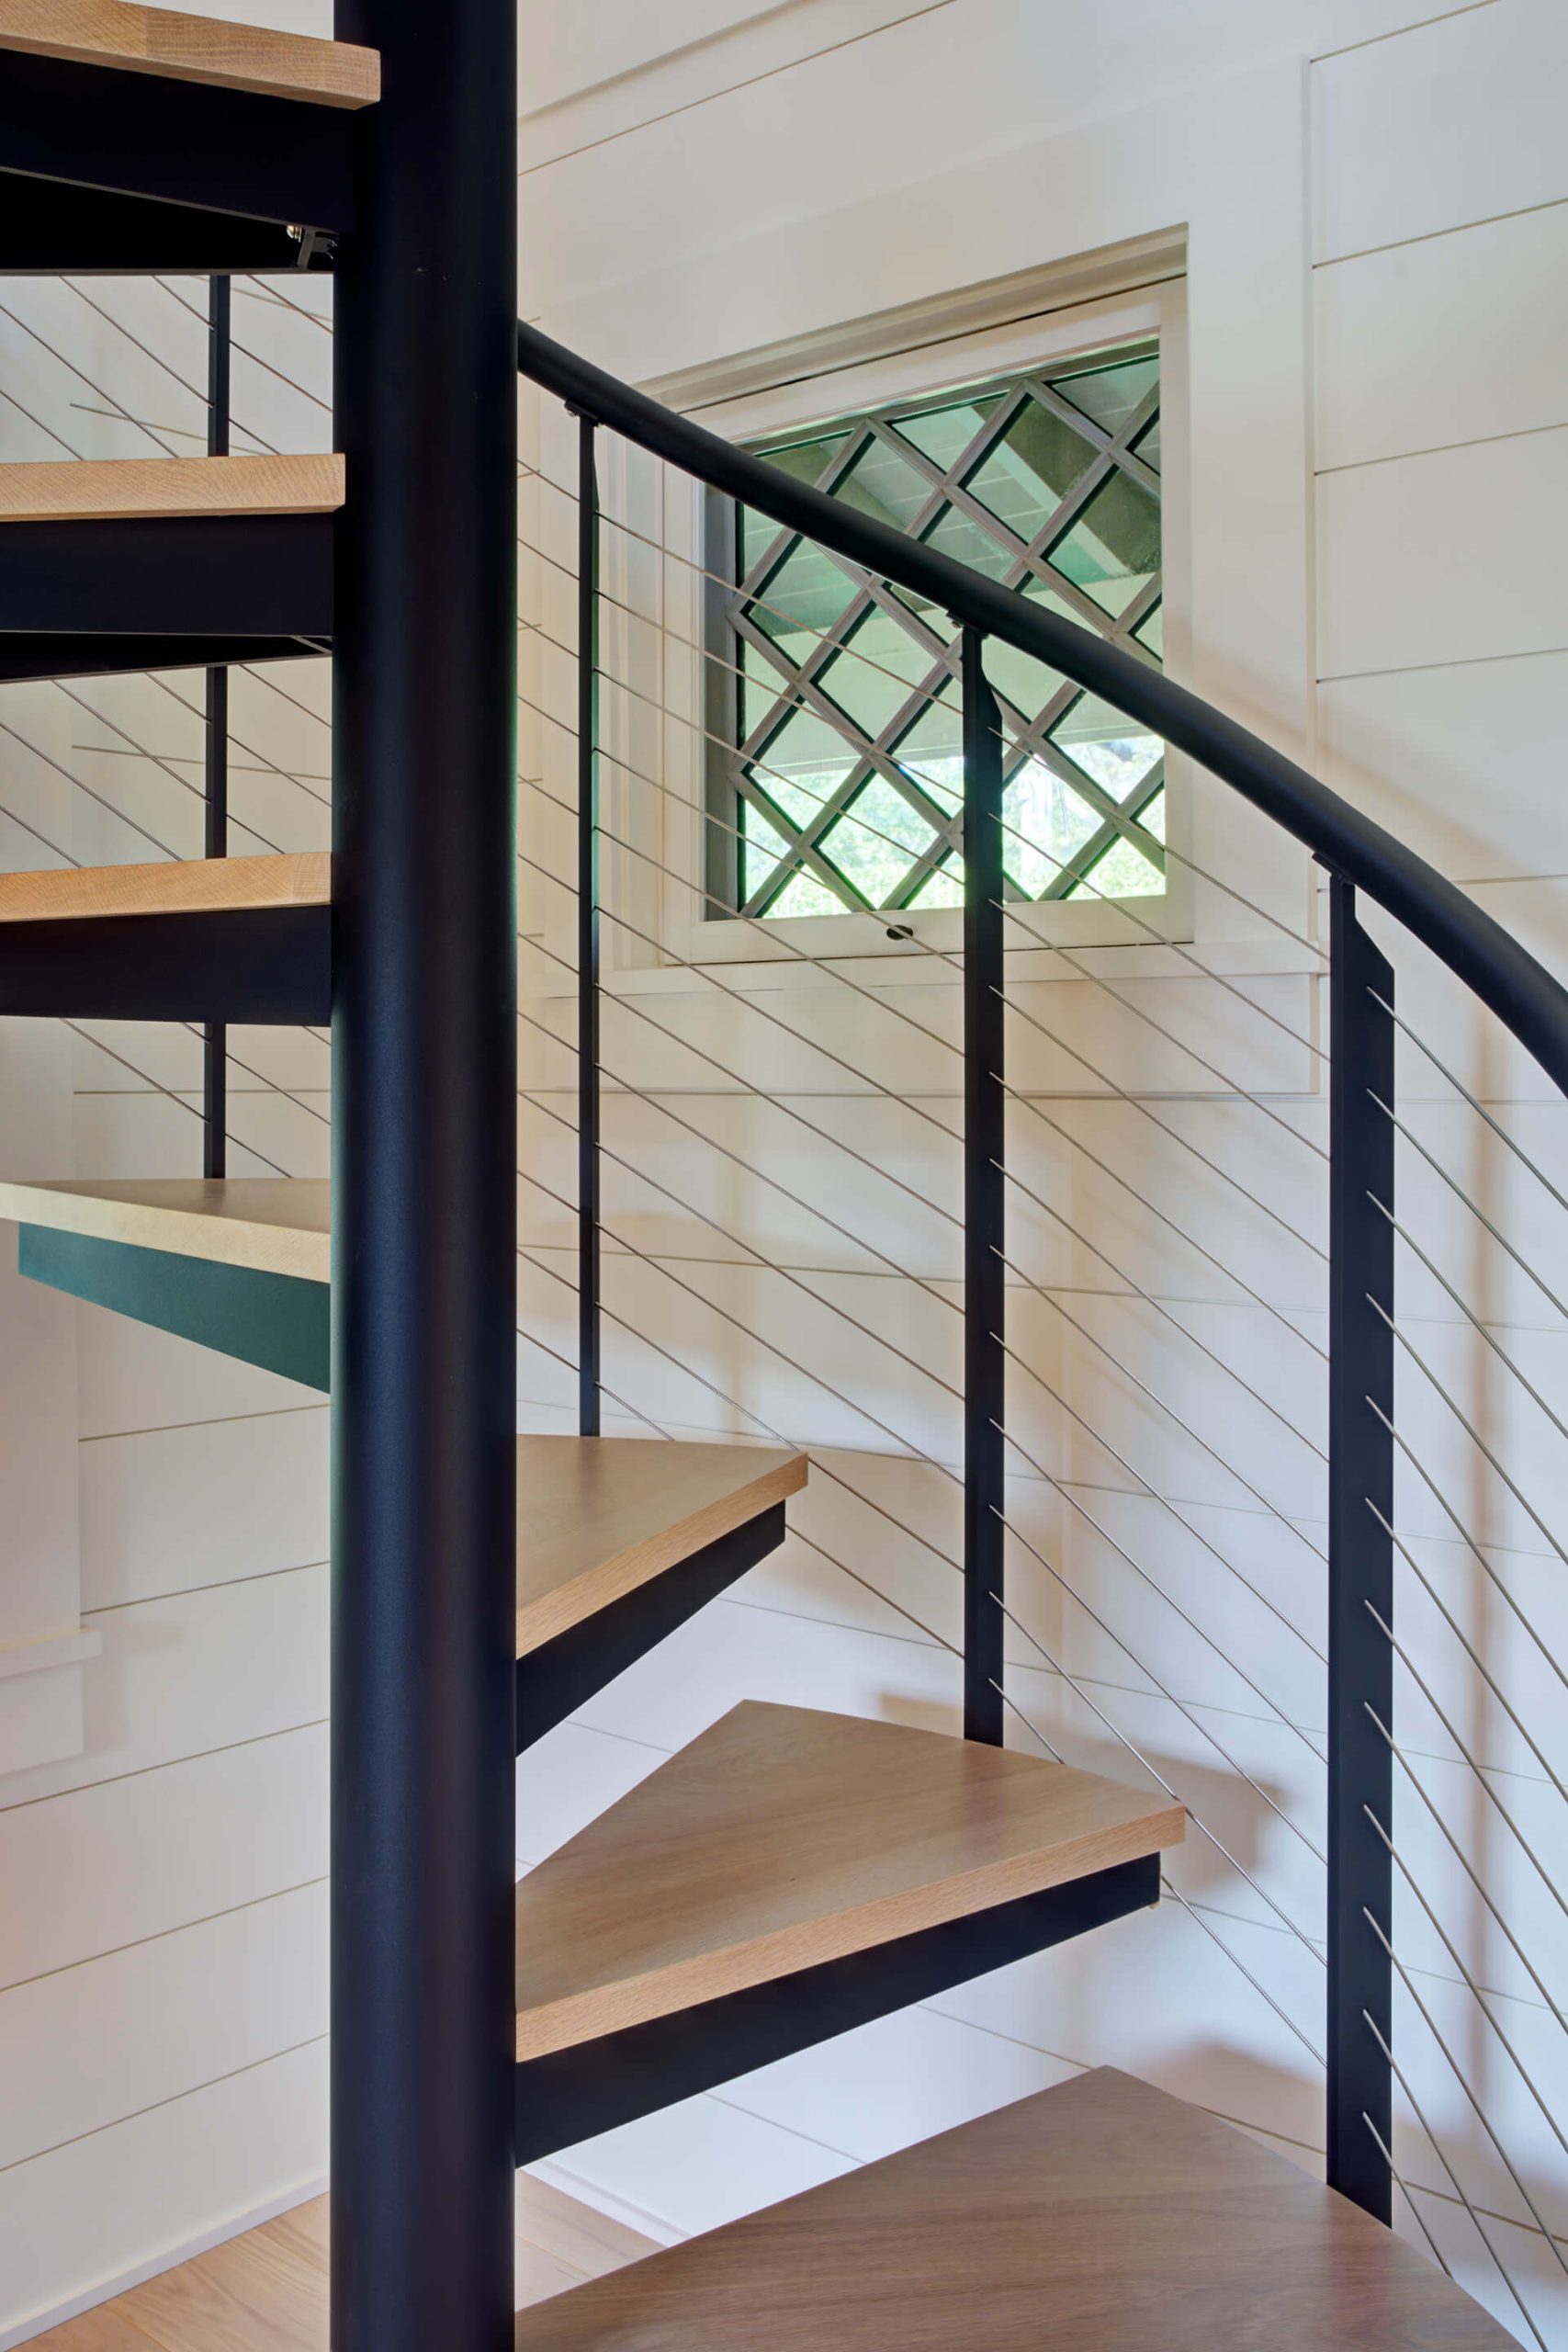 Spiral stair with sleek railing system